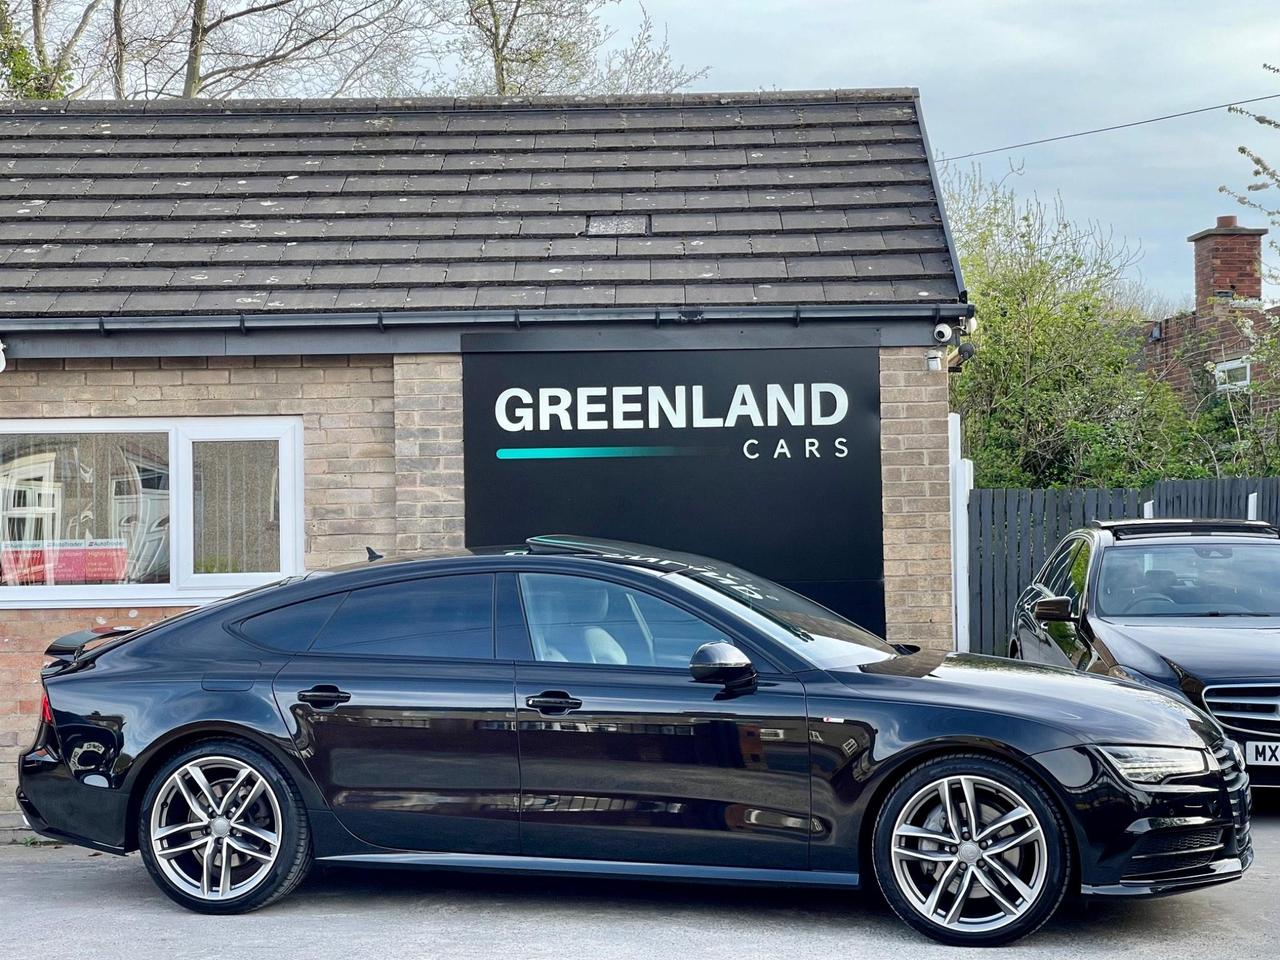 Used 2017 Audi A7 for sale in Sheffield